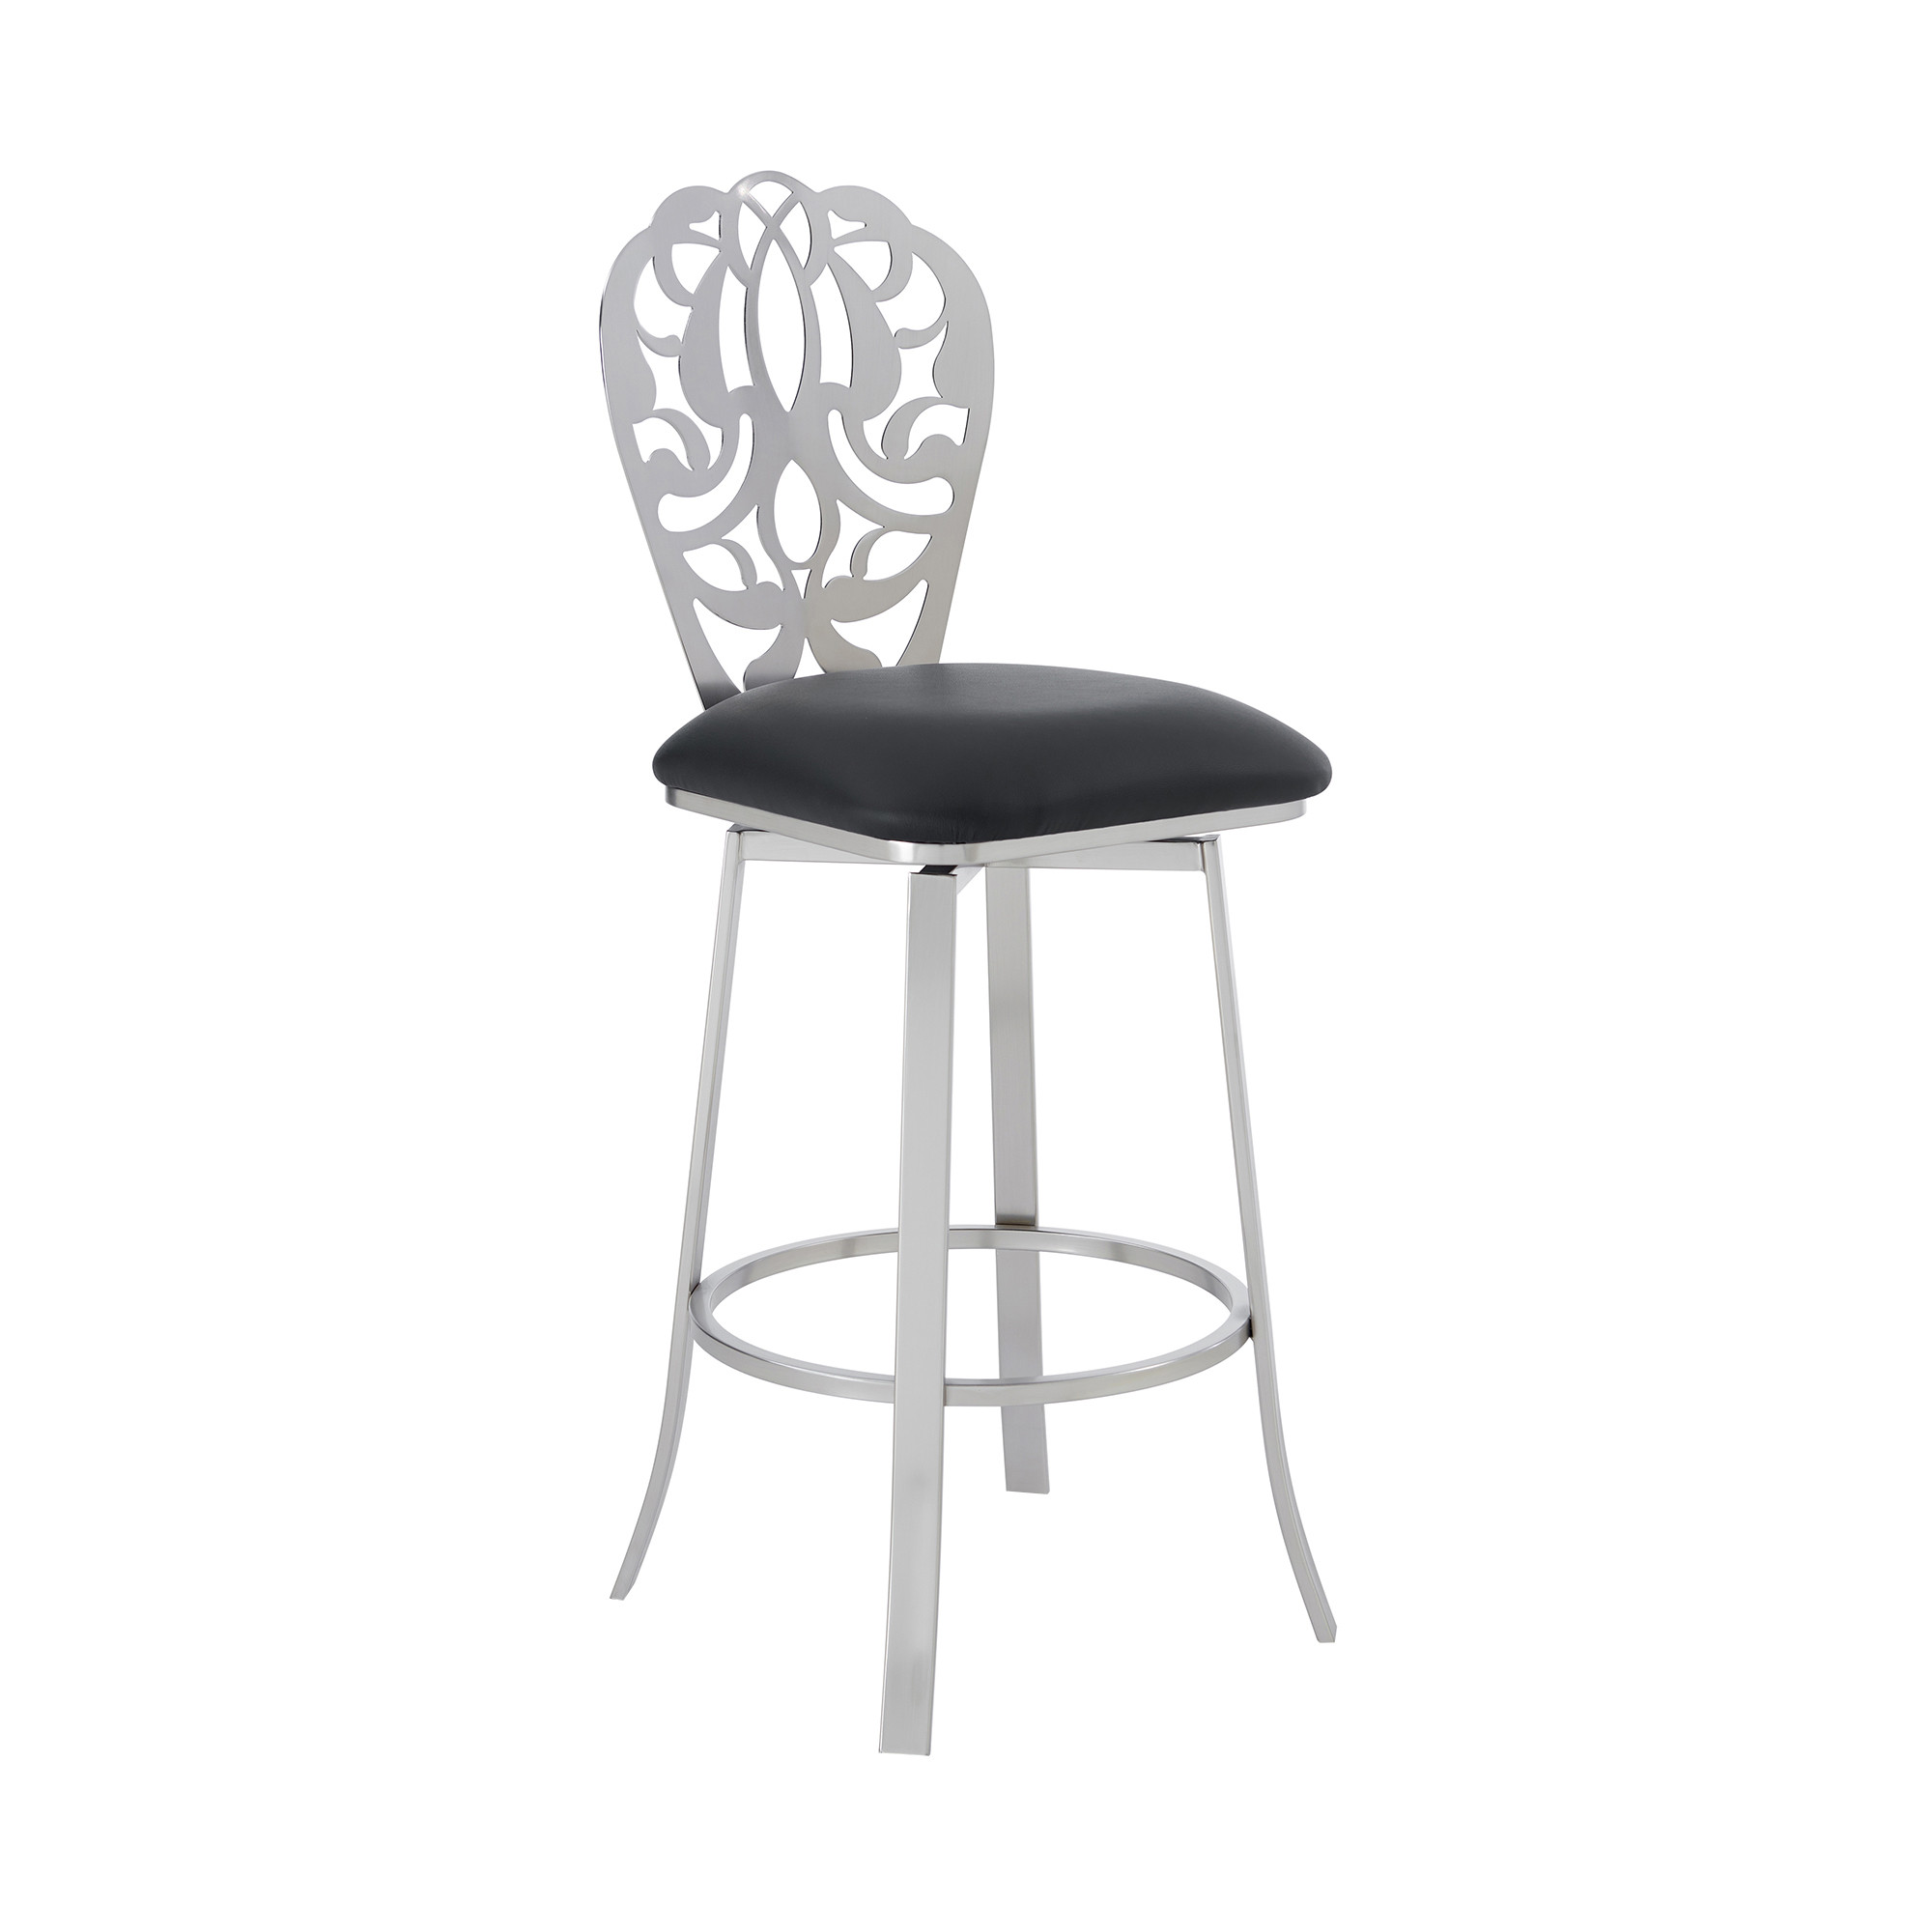 26" Black Faux Leather Scroll Brushed Stainless Steel Swivel Bar Stool